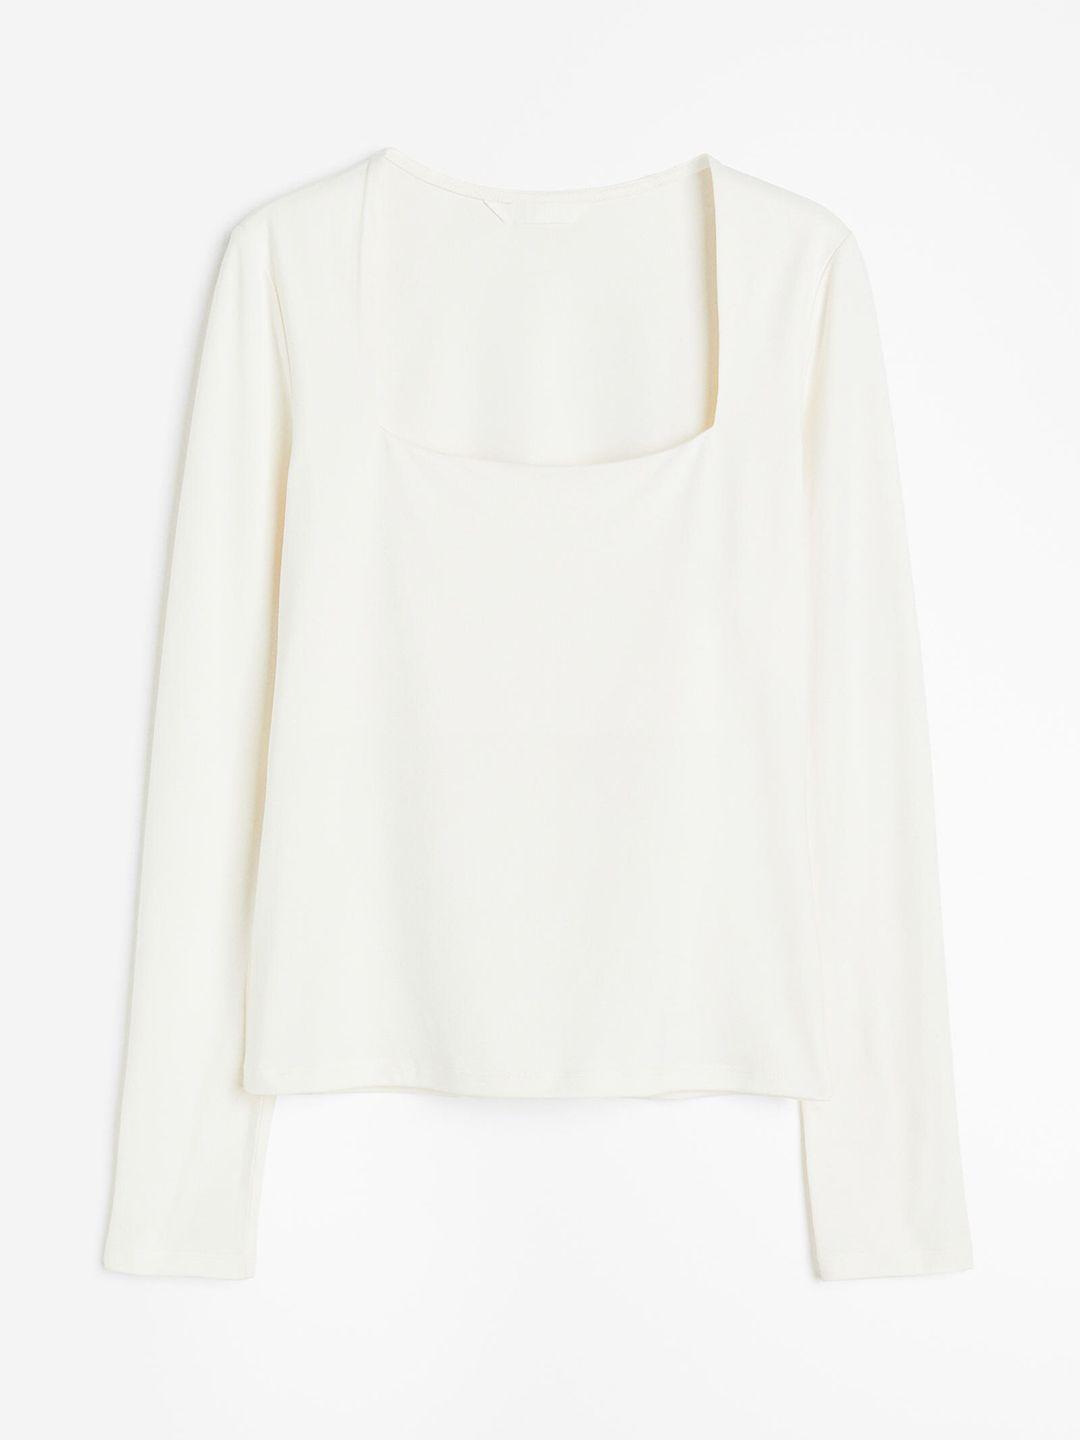 h&m long-sleeved jersey tops